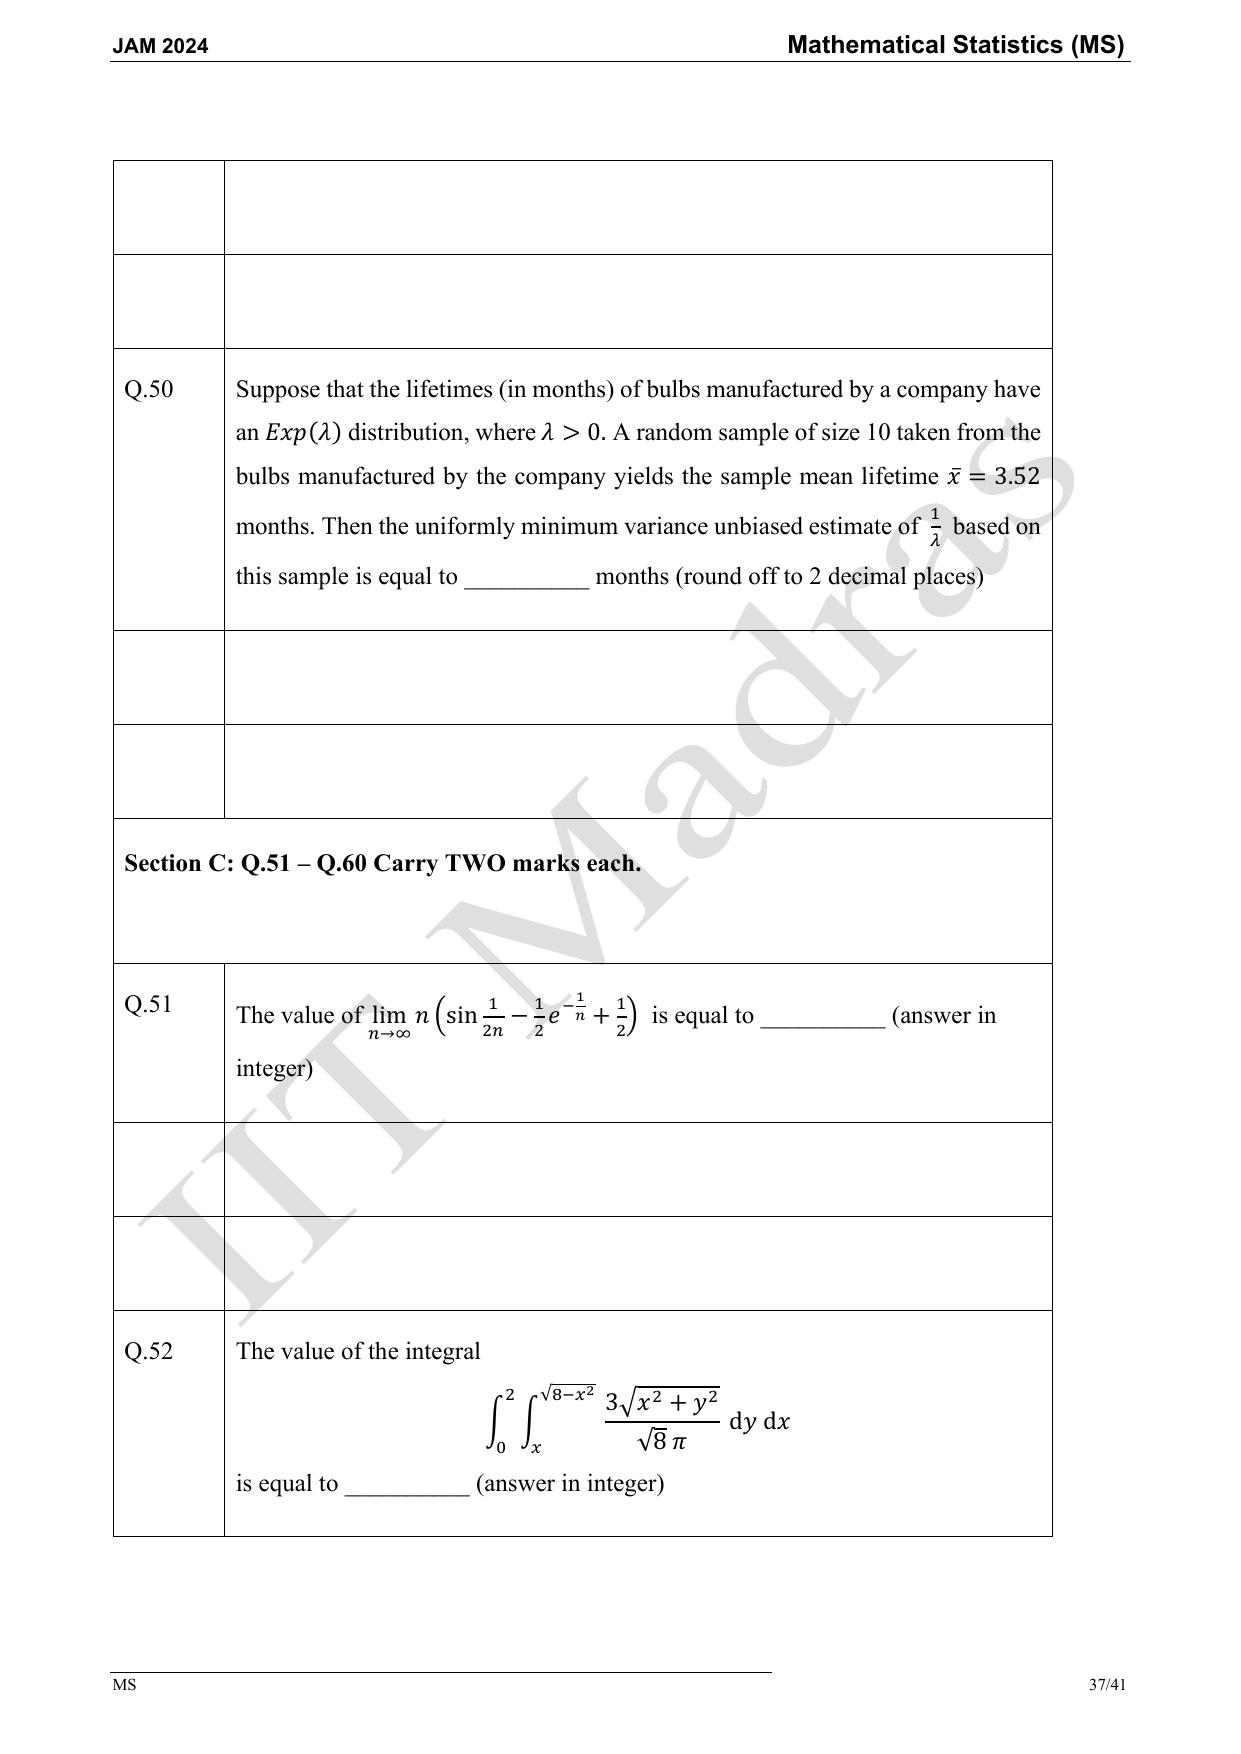 IIT JAM 2024 Mathematical Statistics (MS) Master Question Paper - Page 37